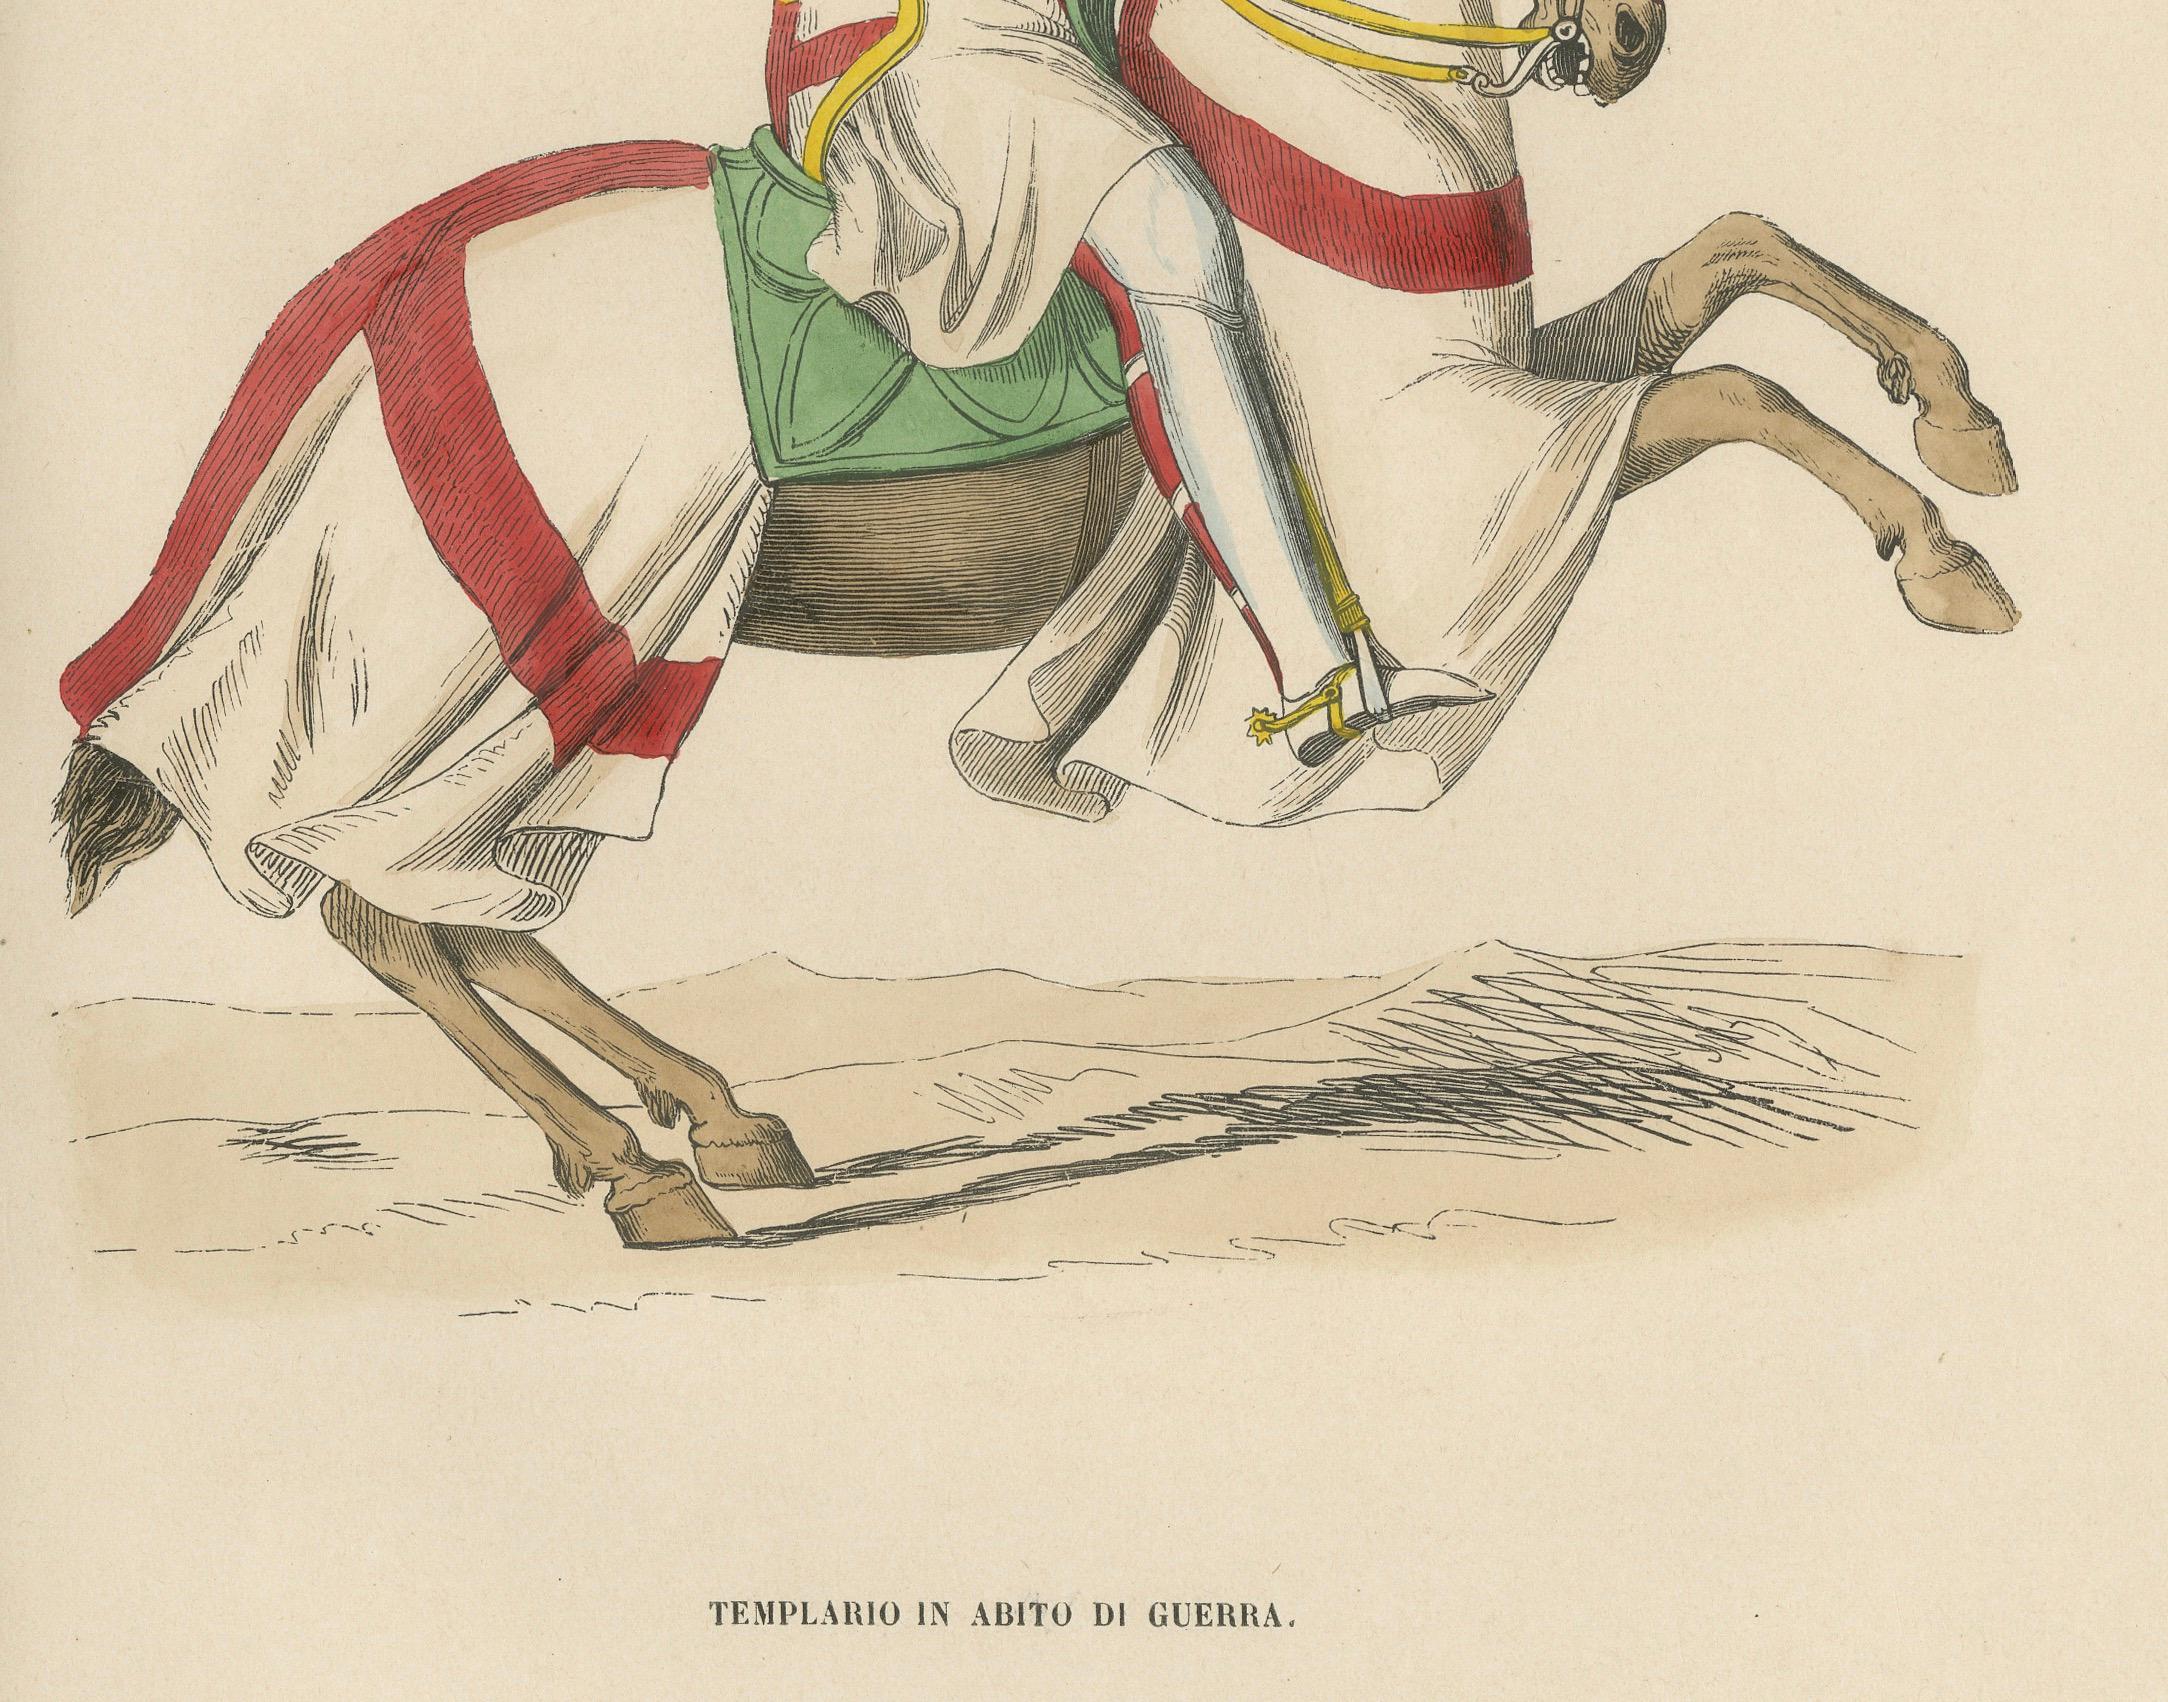 This original handcolored lithograph depicts a Templar knight in full war attire, mounted on a galloping horse. The knight is armored, carrying a sword raised high, likely in a charge or battle cry pose. The horse is caparisoned with a cloth that